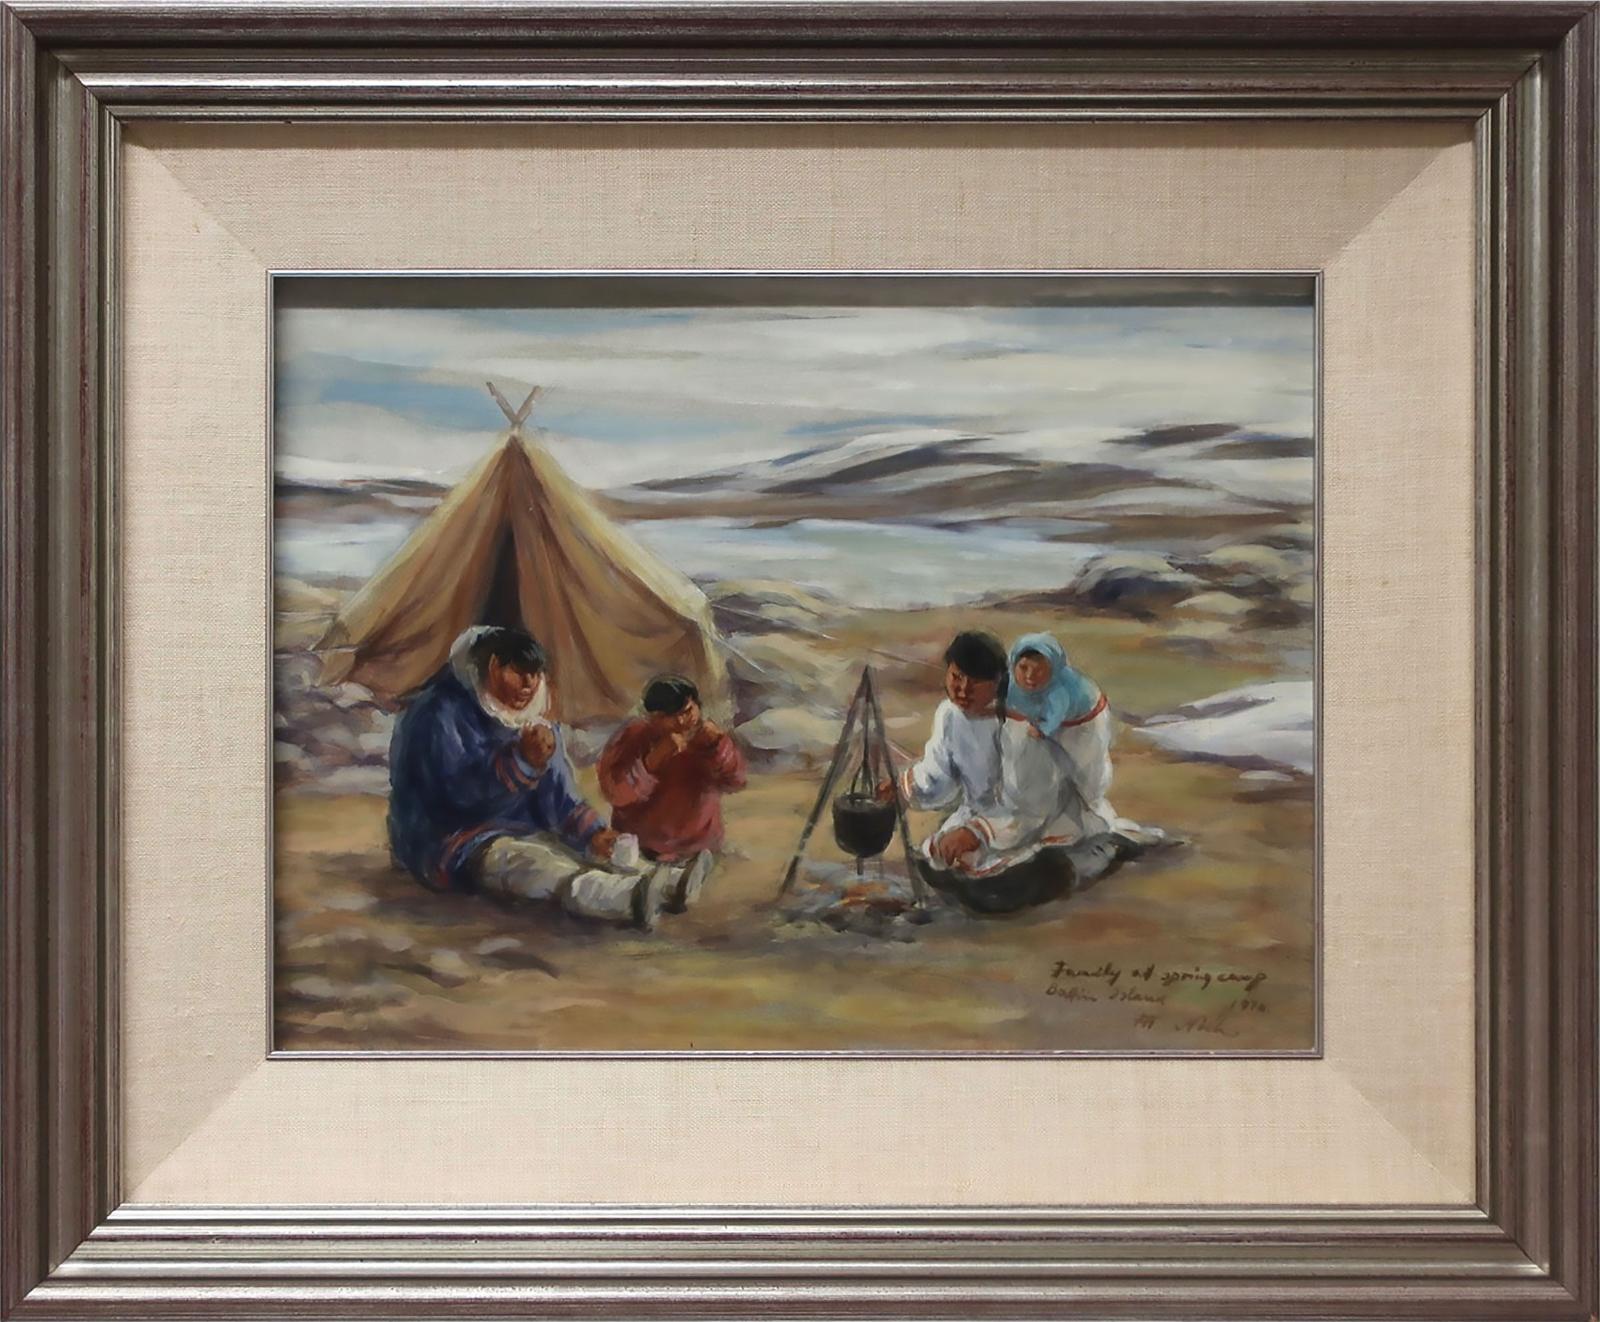 Anna T. Noeh (1926-2016) - Family At Spring Camp, Baffin Island